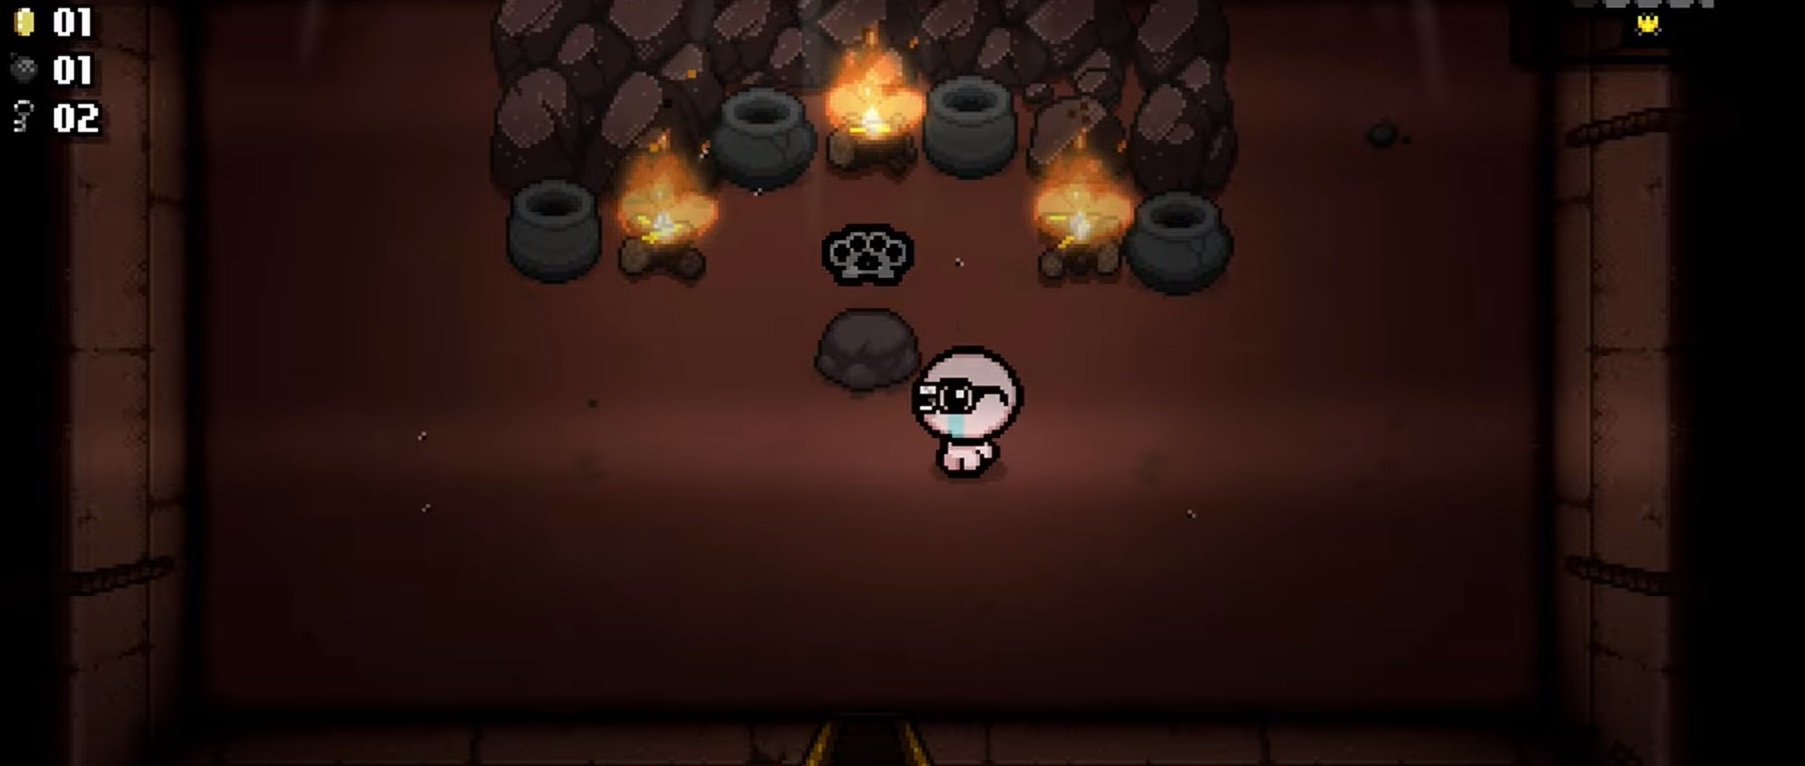 The Binding of Isaac for Steam Deck